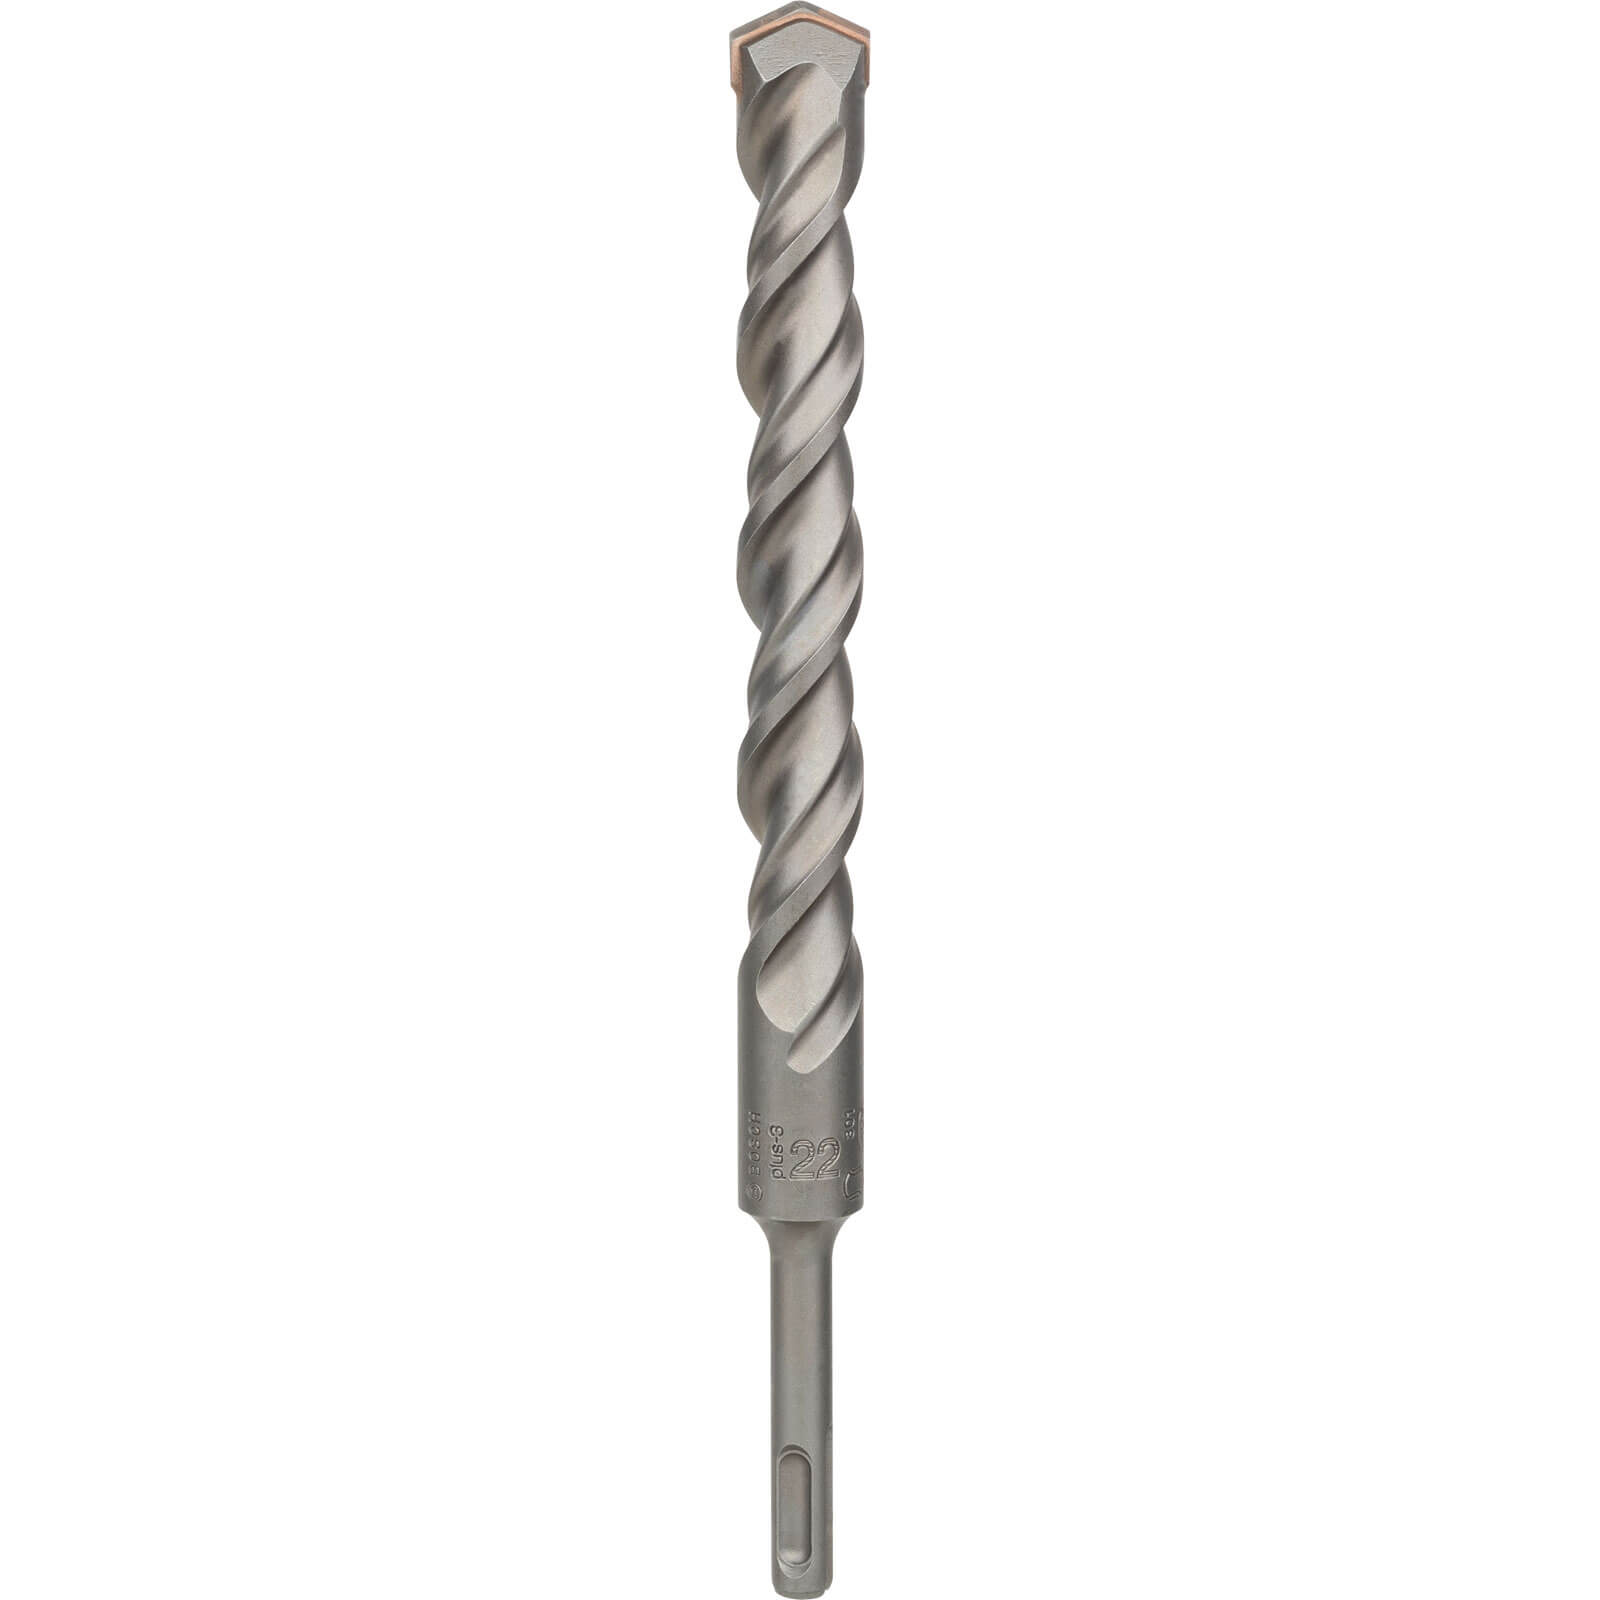 Image of Bosch Series 3 SDS Plus Masonry Drill Bit 22mm 250mm Pack of 1